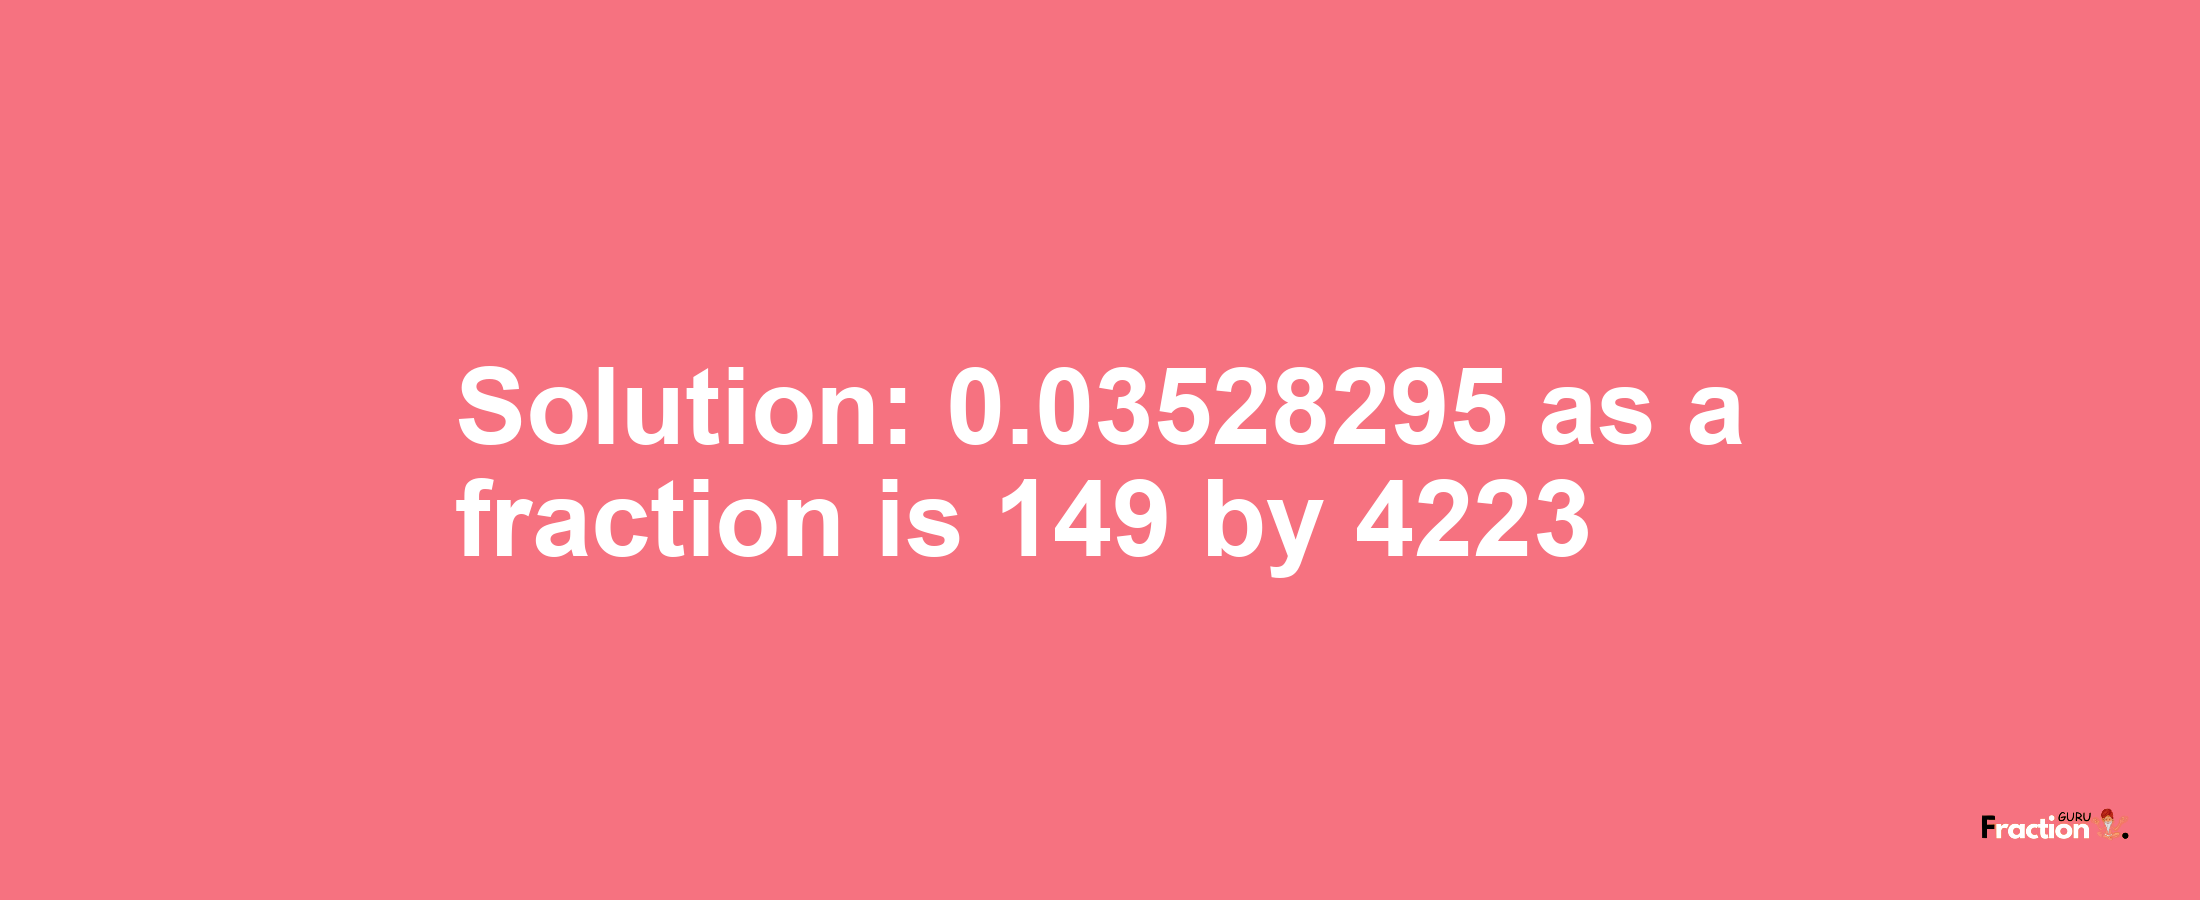 Solution:0.03528295 as a fraction is 149/4223